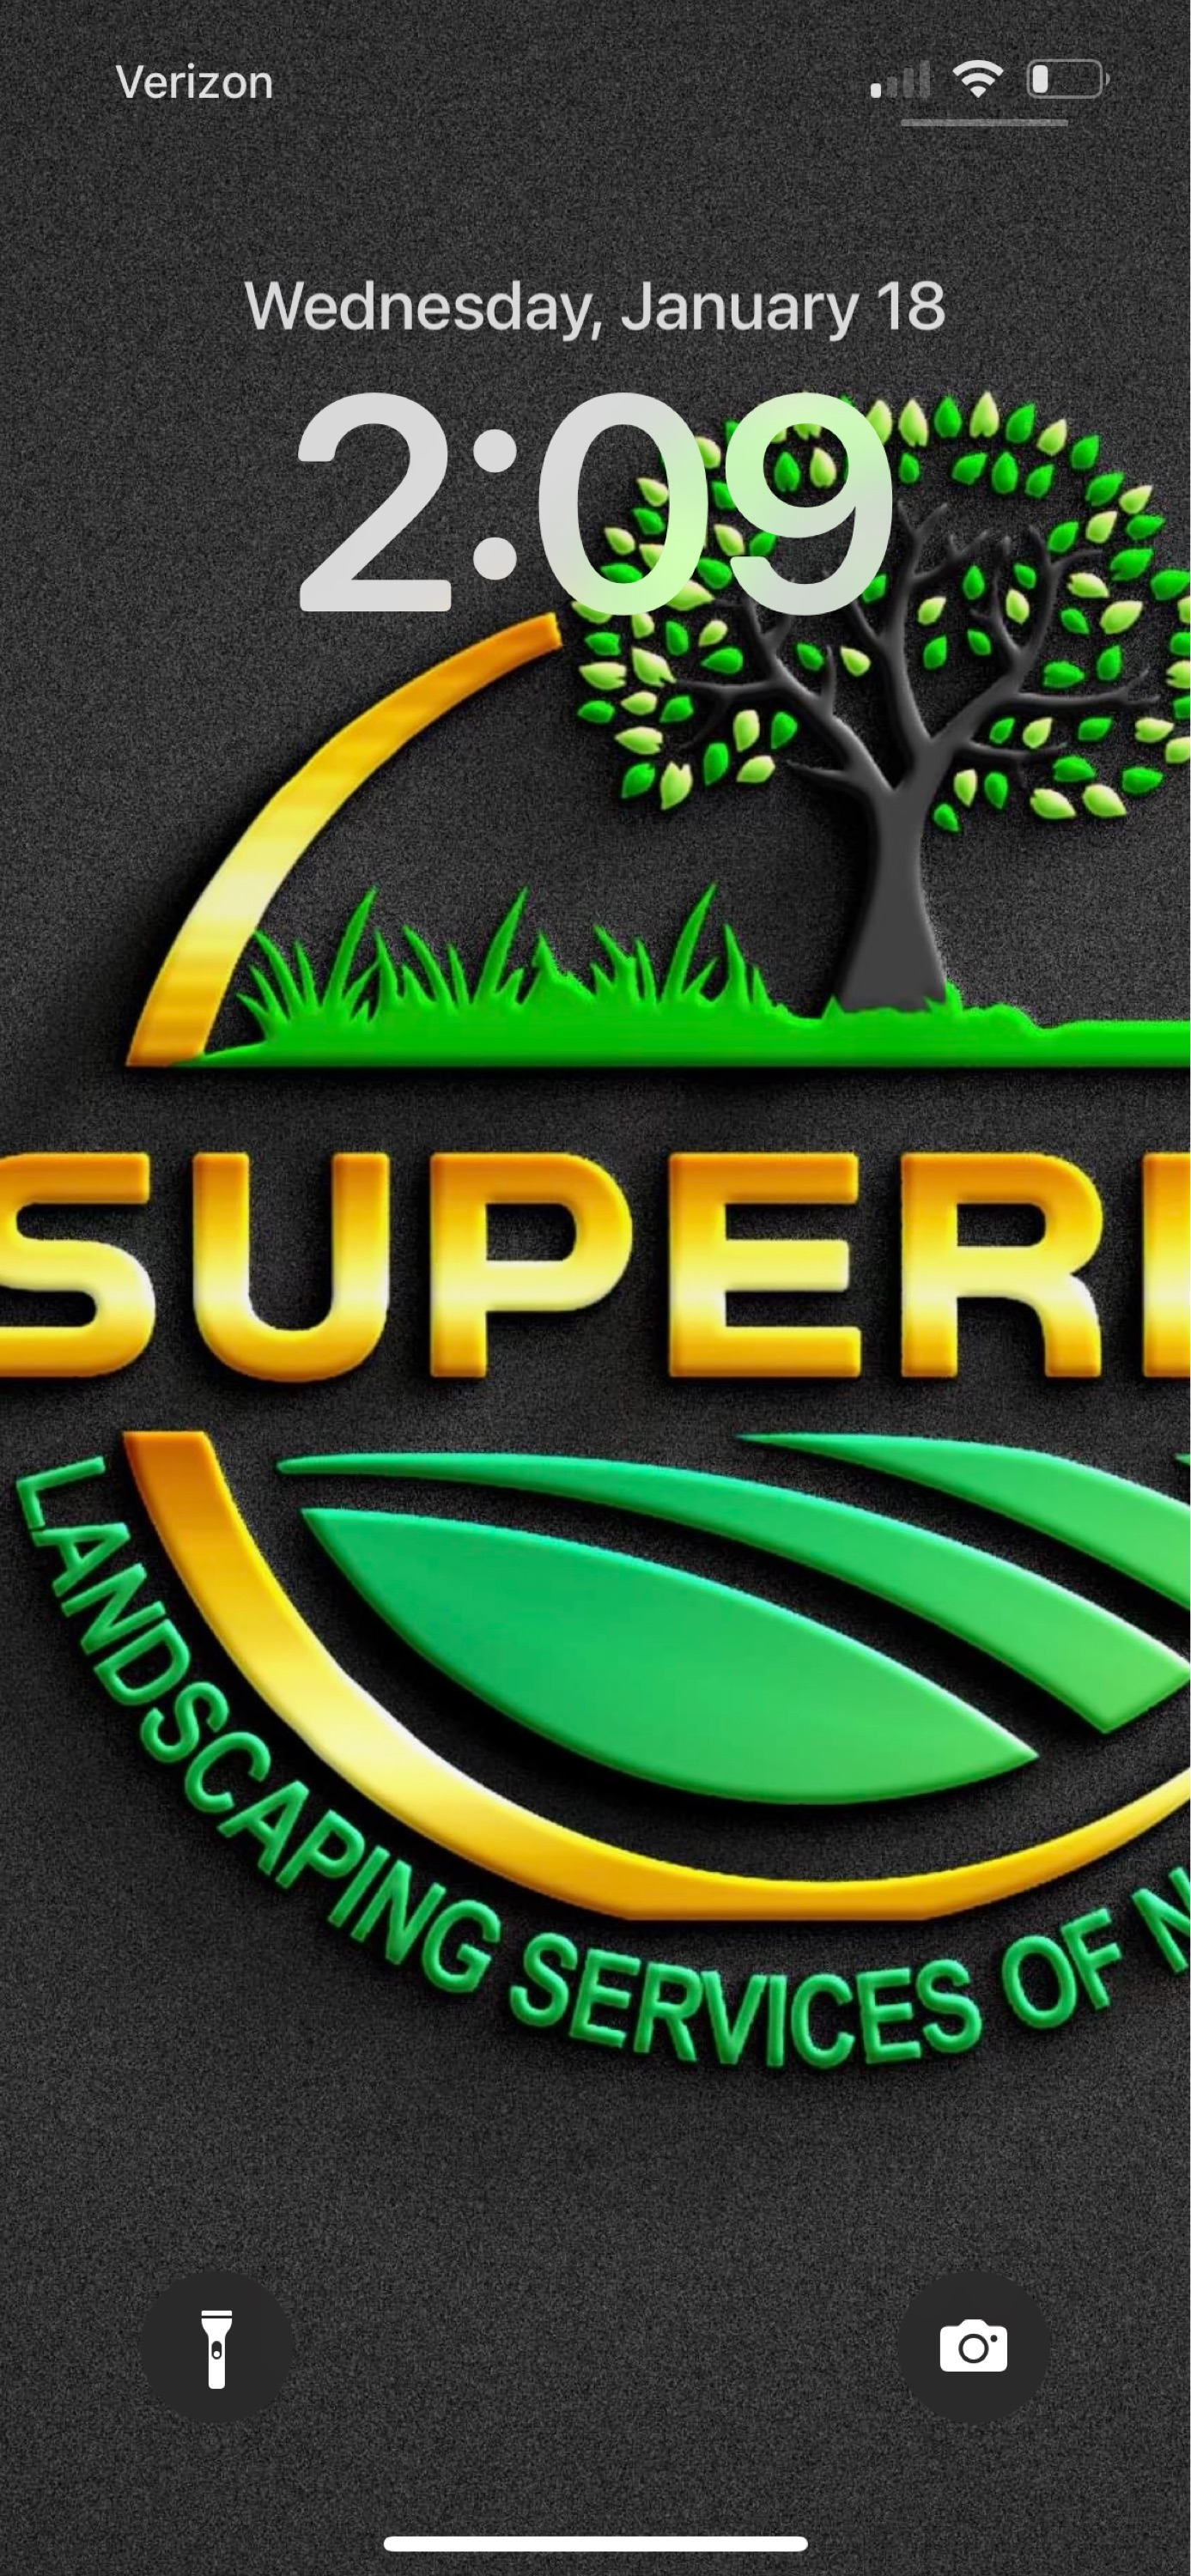 Superior Landscaping Services of Naples LLC Logo